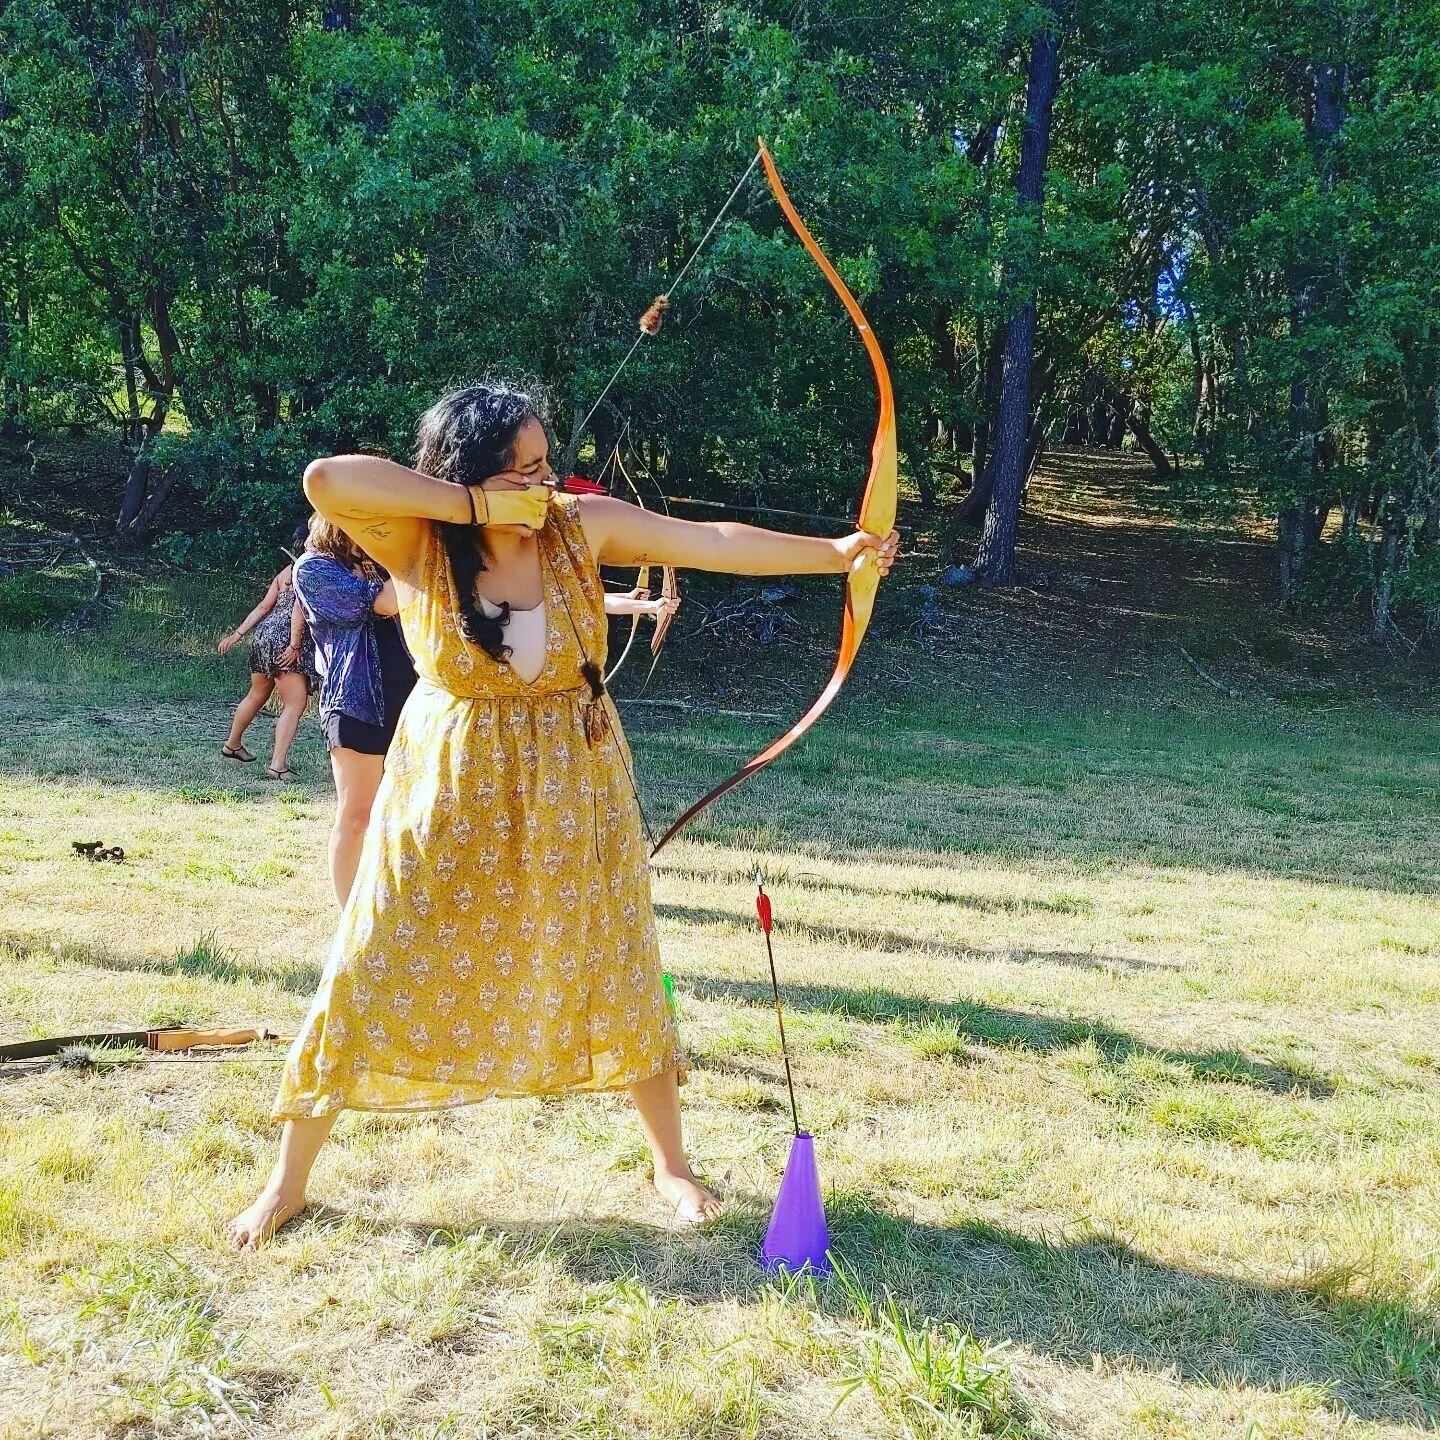 Discovering my inner warrior @spiritweavers - I am having an amazing time with 700 women in the woods, couldn't not share this moment of pure joy and strength that happened on a beautiful day, in the mountains and pasture. The grass was flowing golde